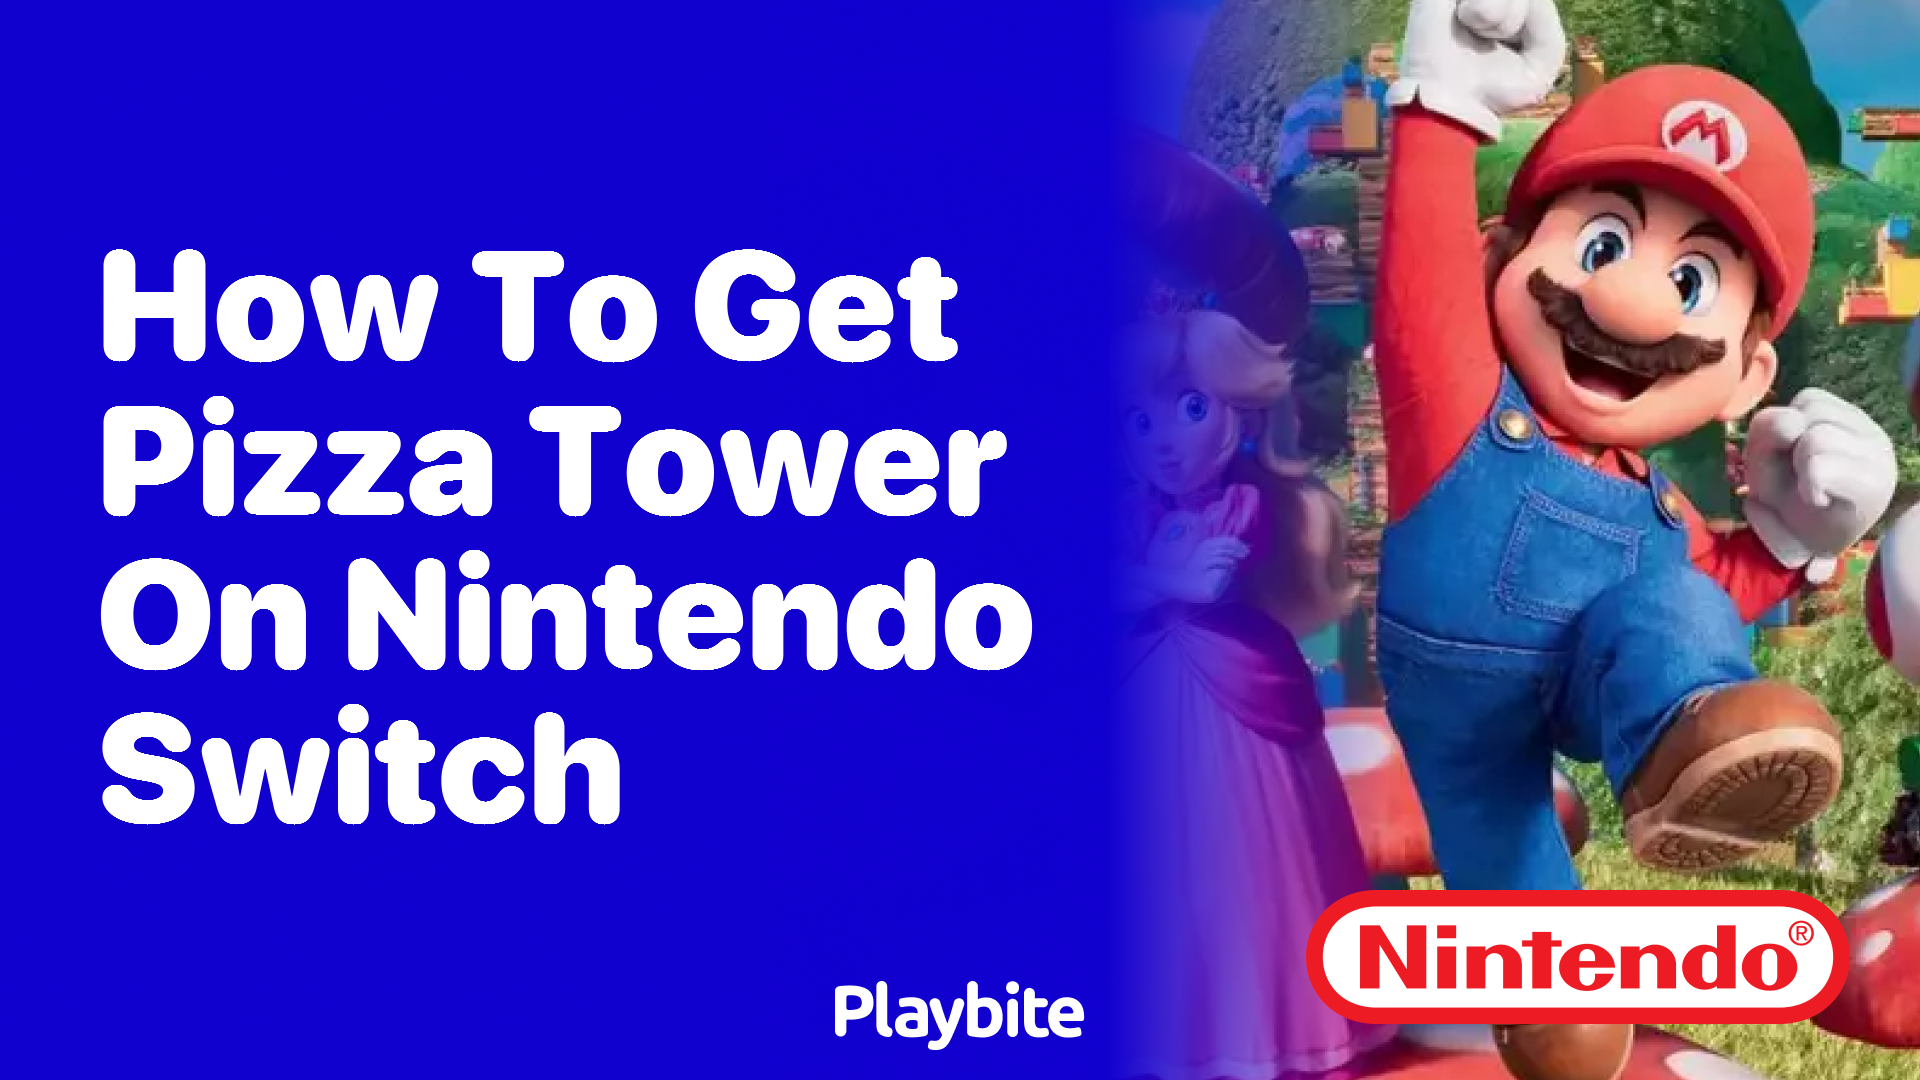 How to Get Pizza Tower on Nintendo Switch